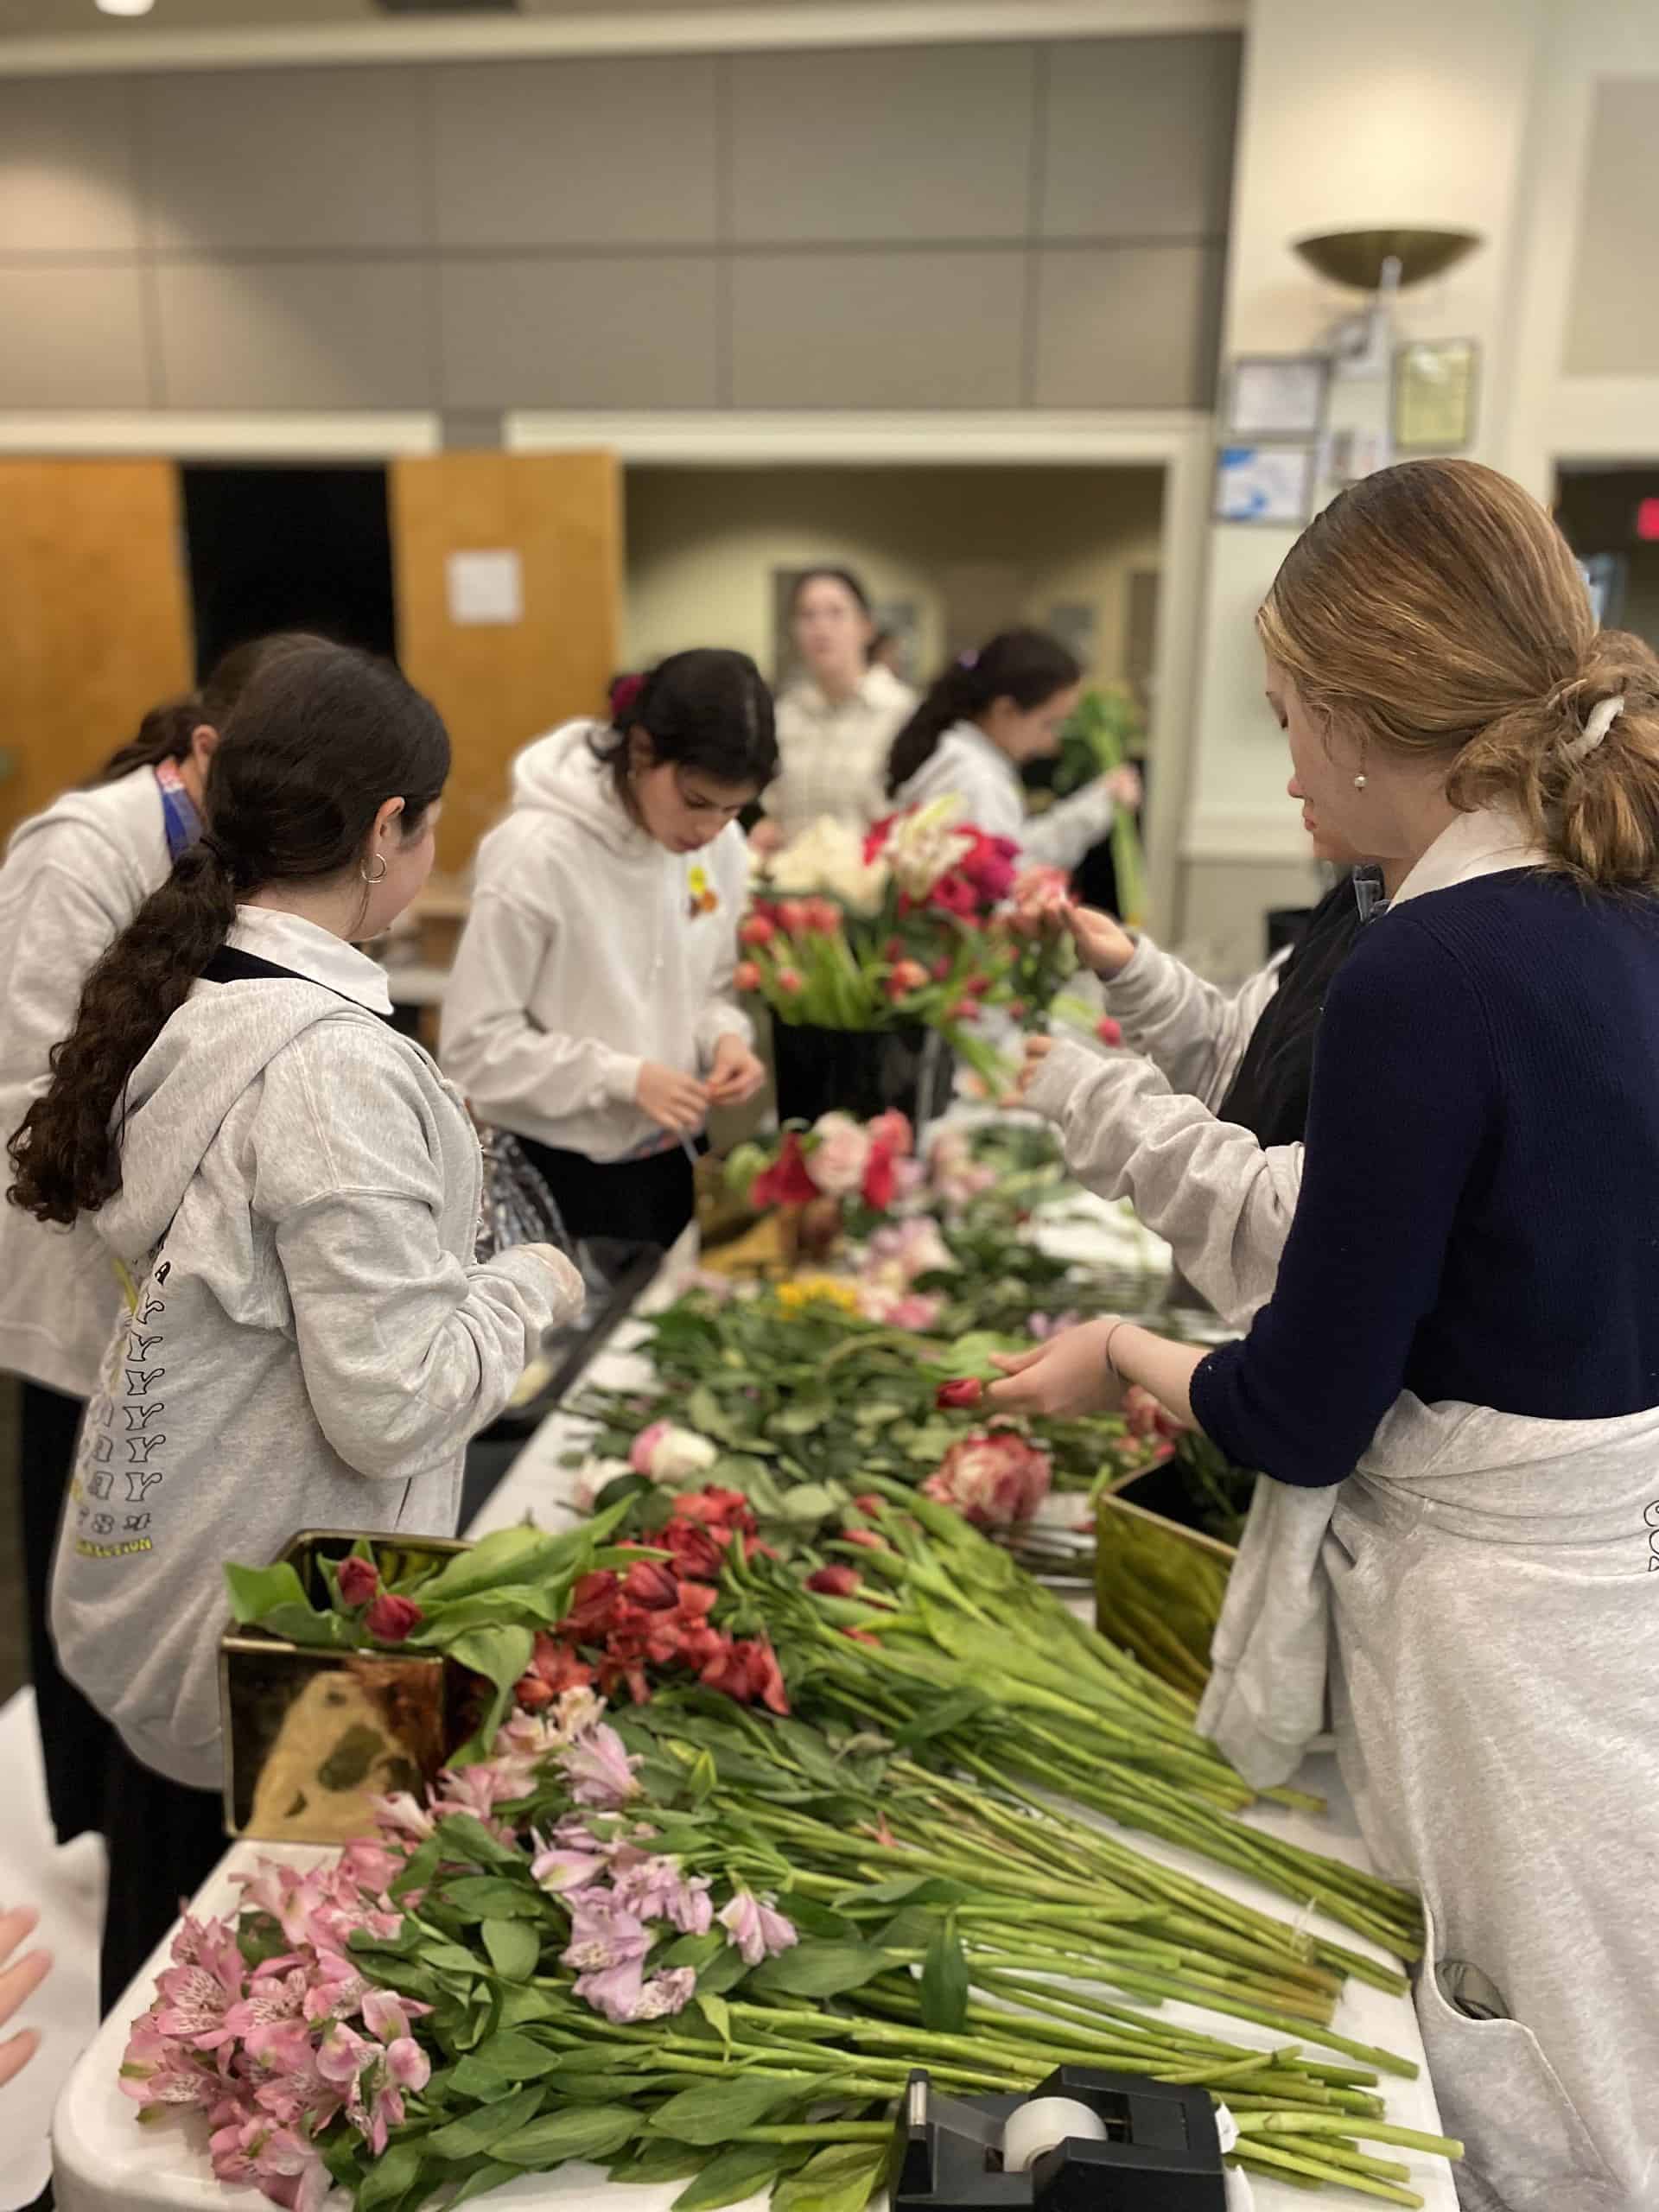 Temima High School students prepare flowers for Block Party Kiddush at Beth Jacob Atlanta, which took place during the Shabbat Project. Credit: Courtesy of Beth Jacob Atlanta.